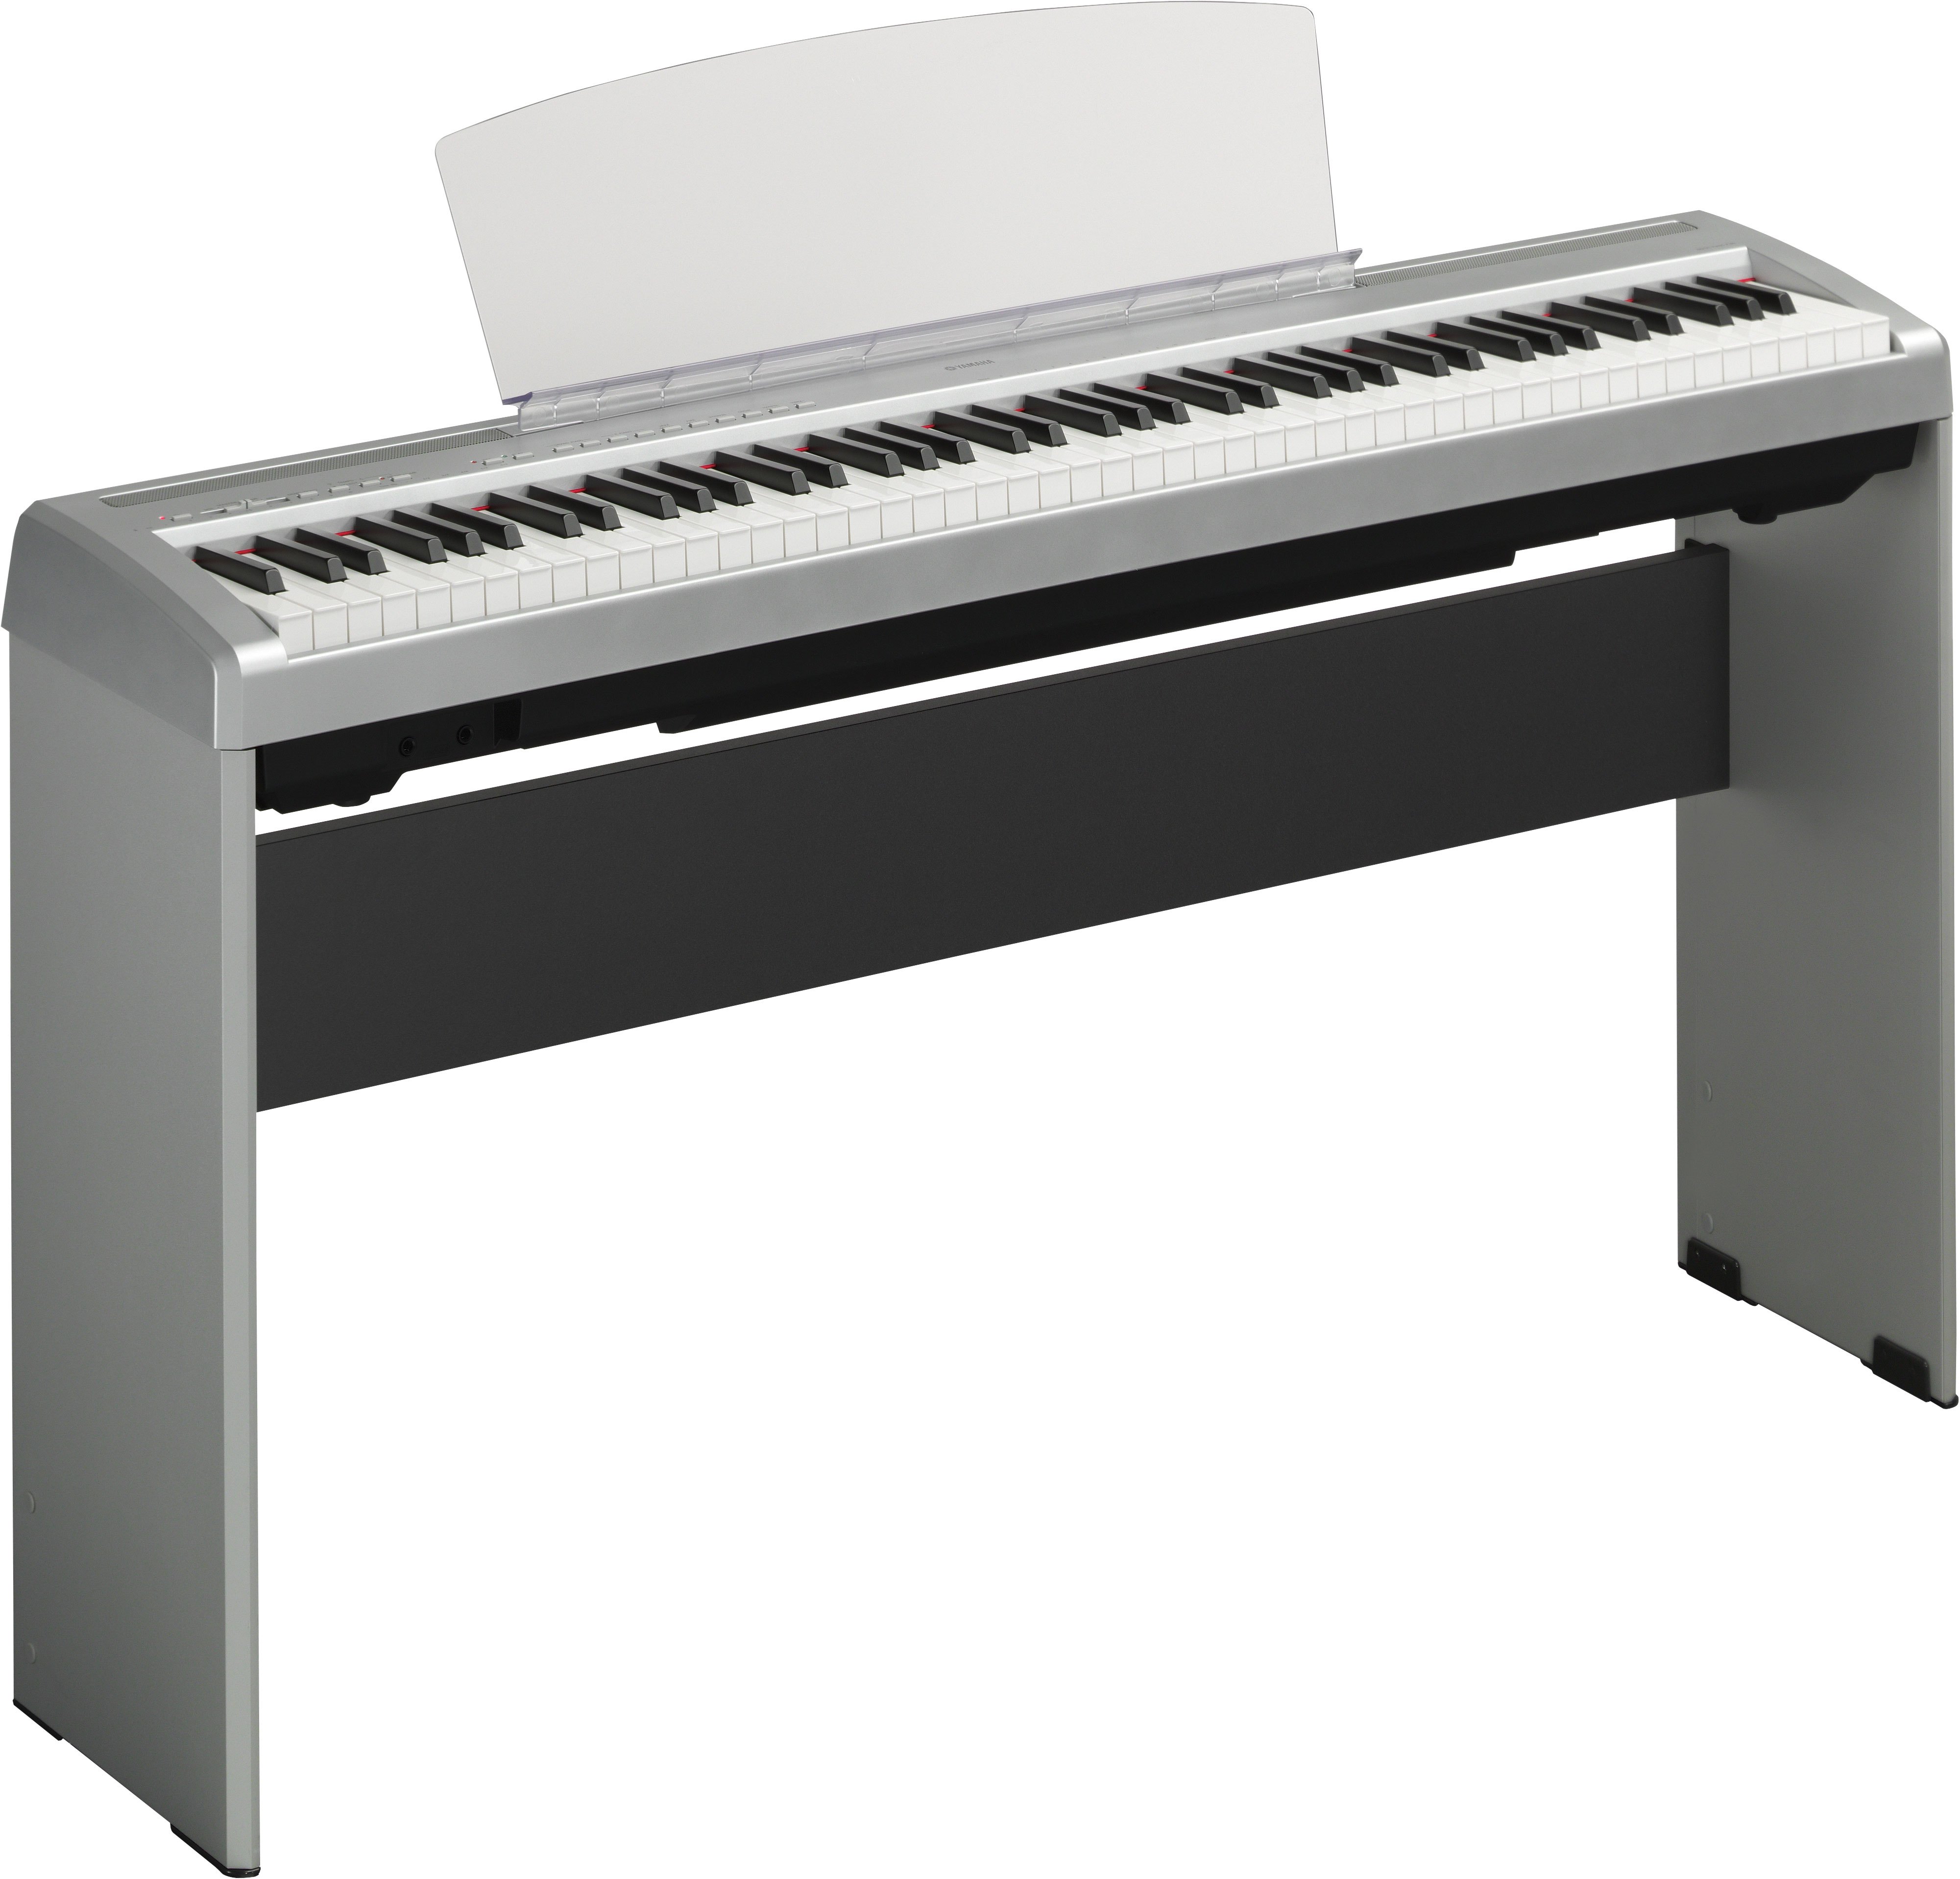 P-95 - Overview - Portables - Pianos - Musical Instruments 